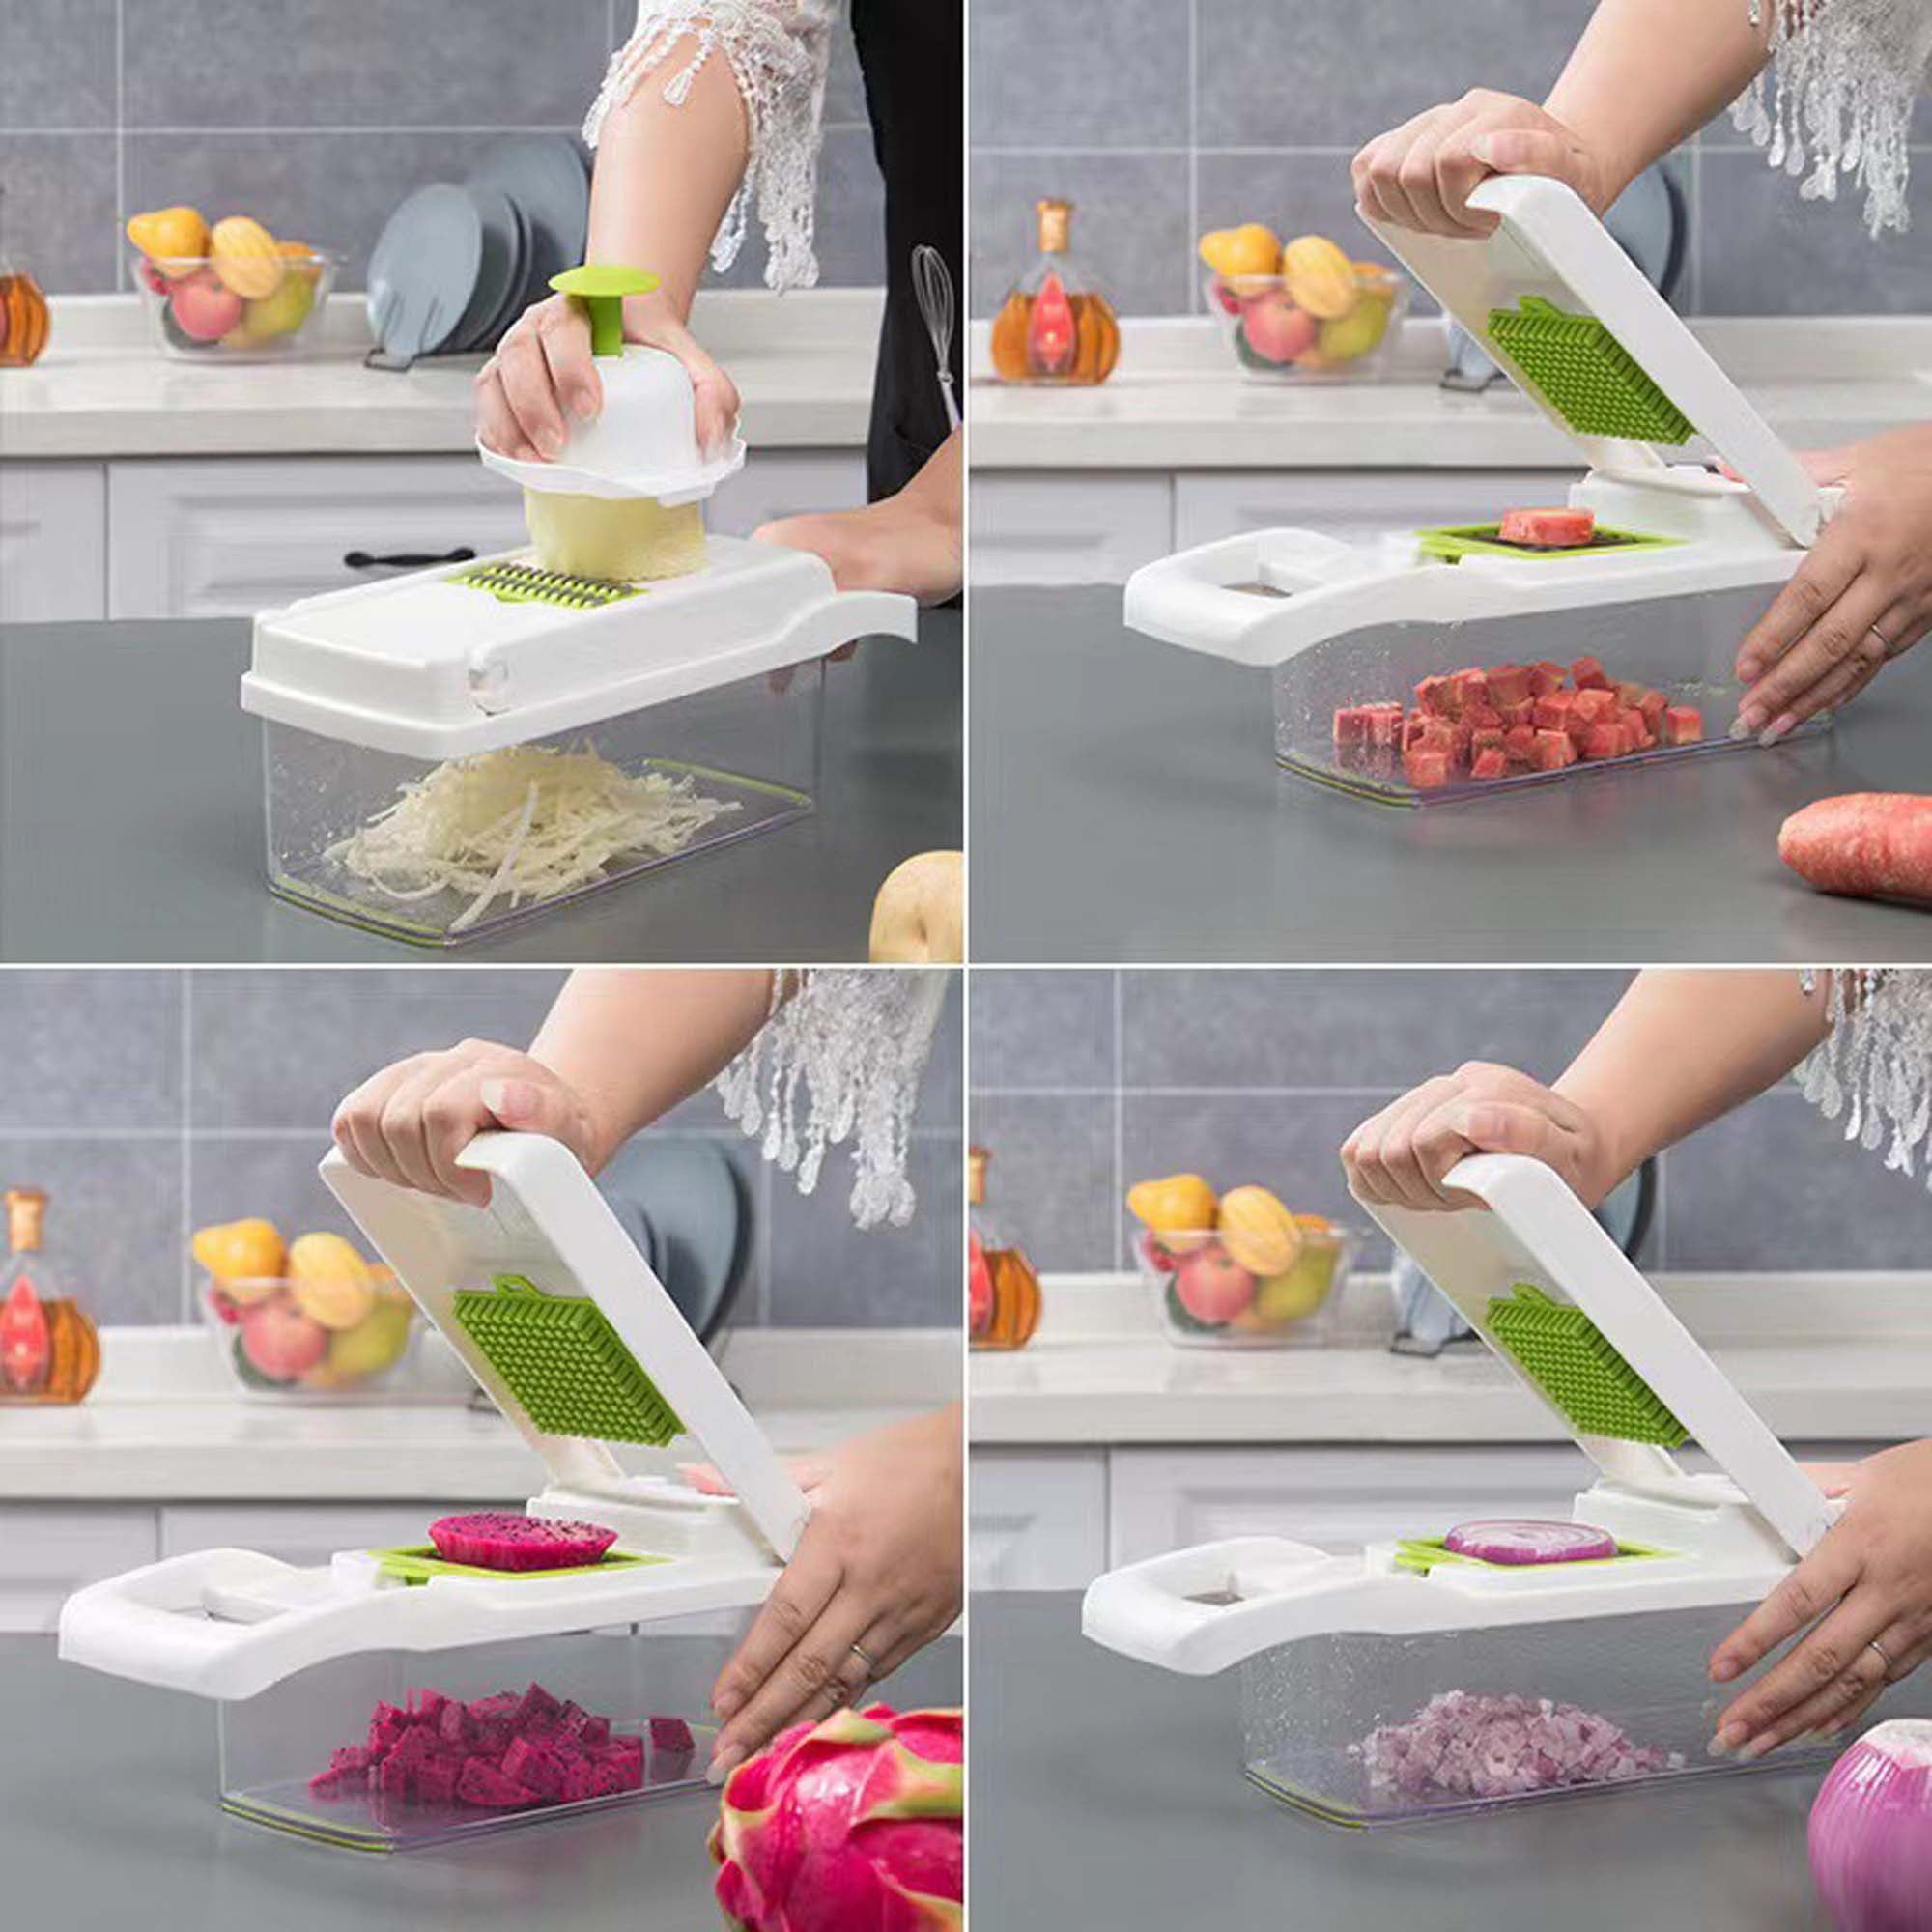 13-in-1 Vegetable Chopper Multifunctional Food Choppers Onion